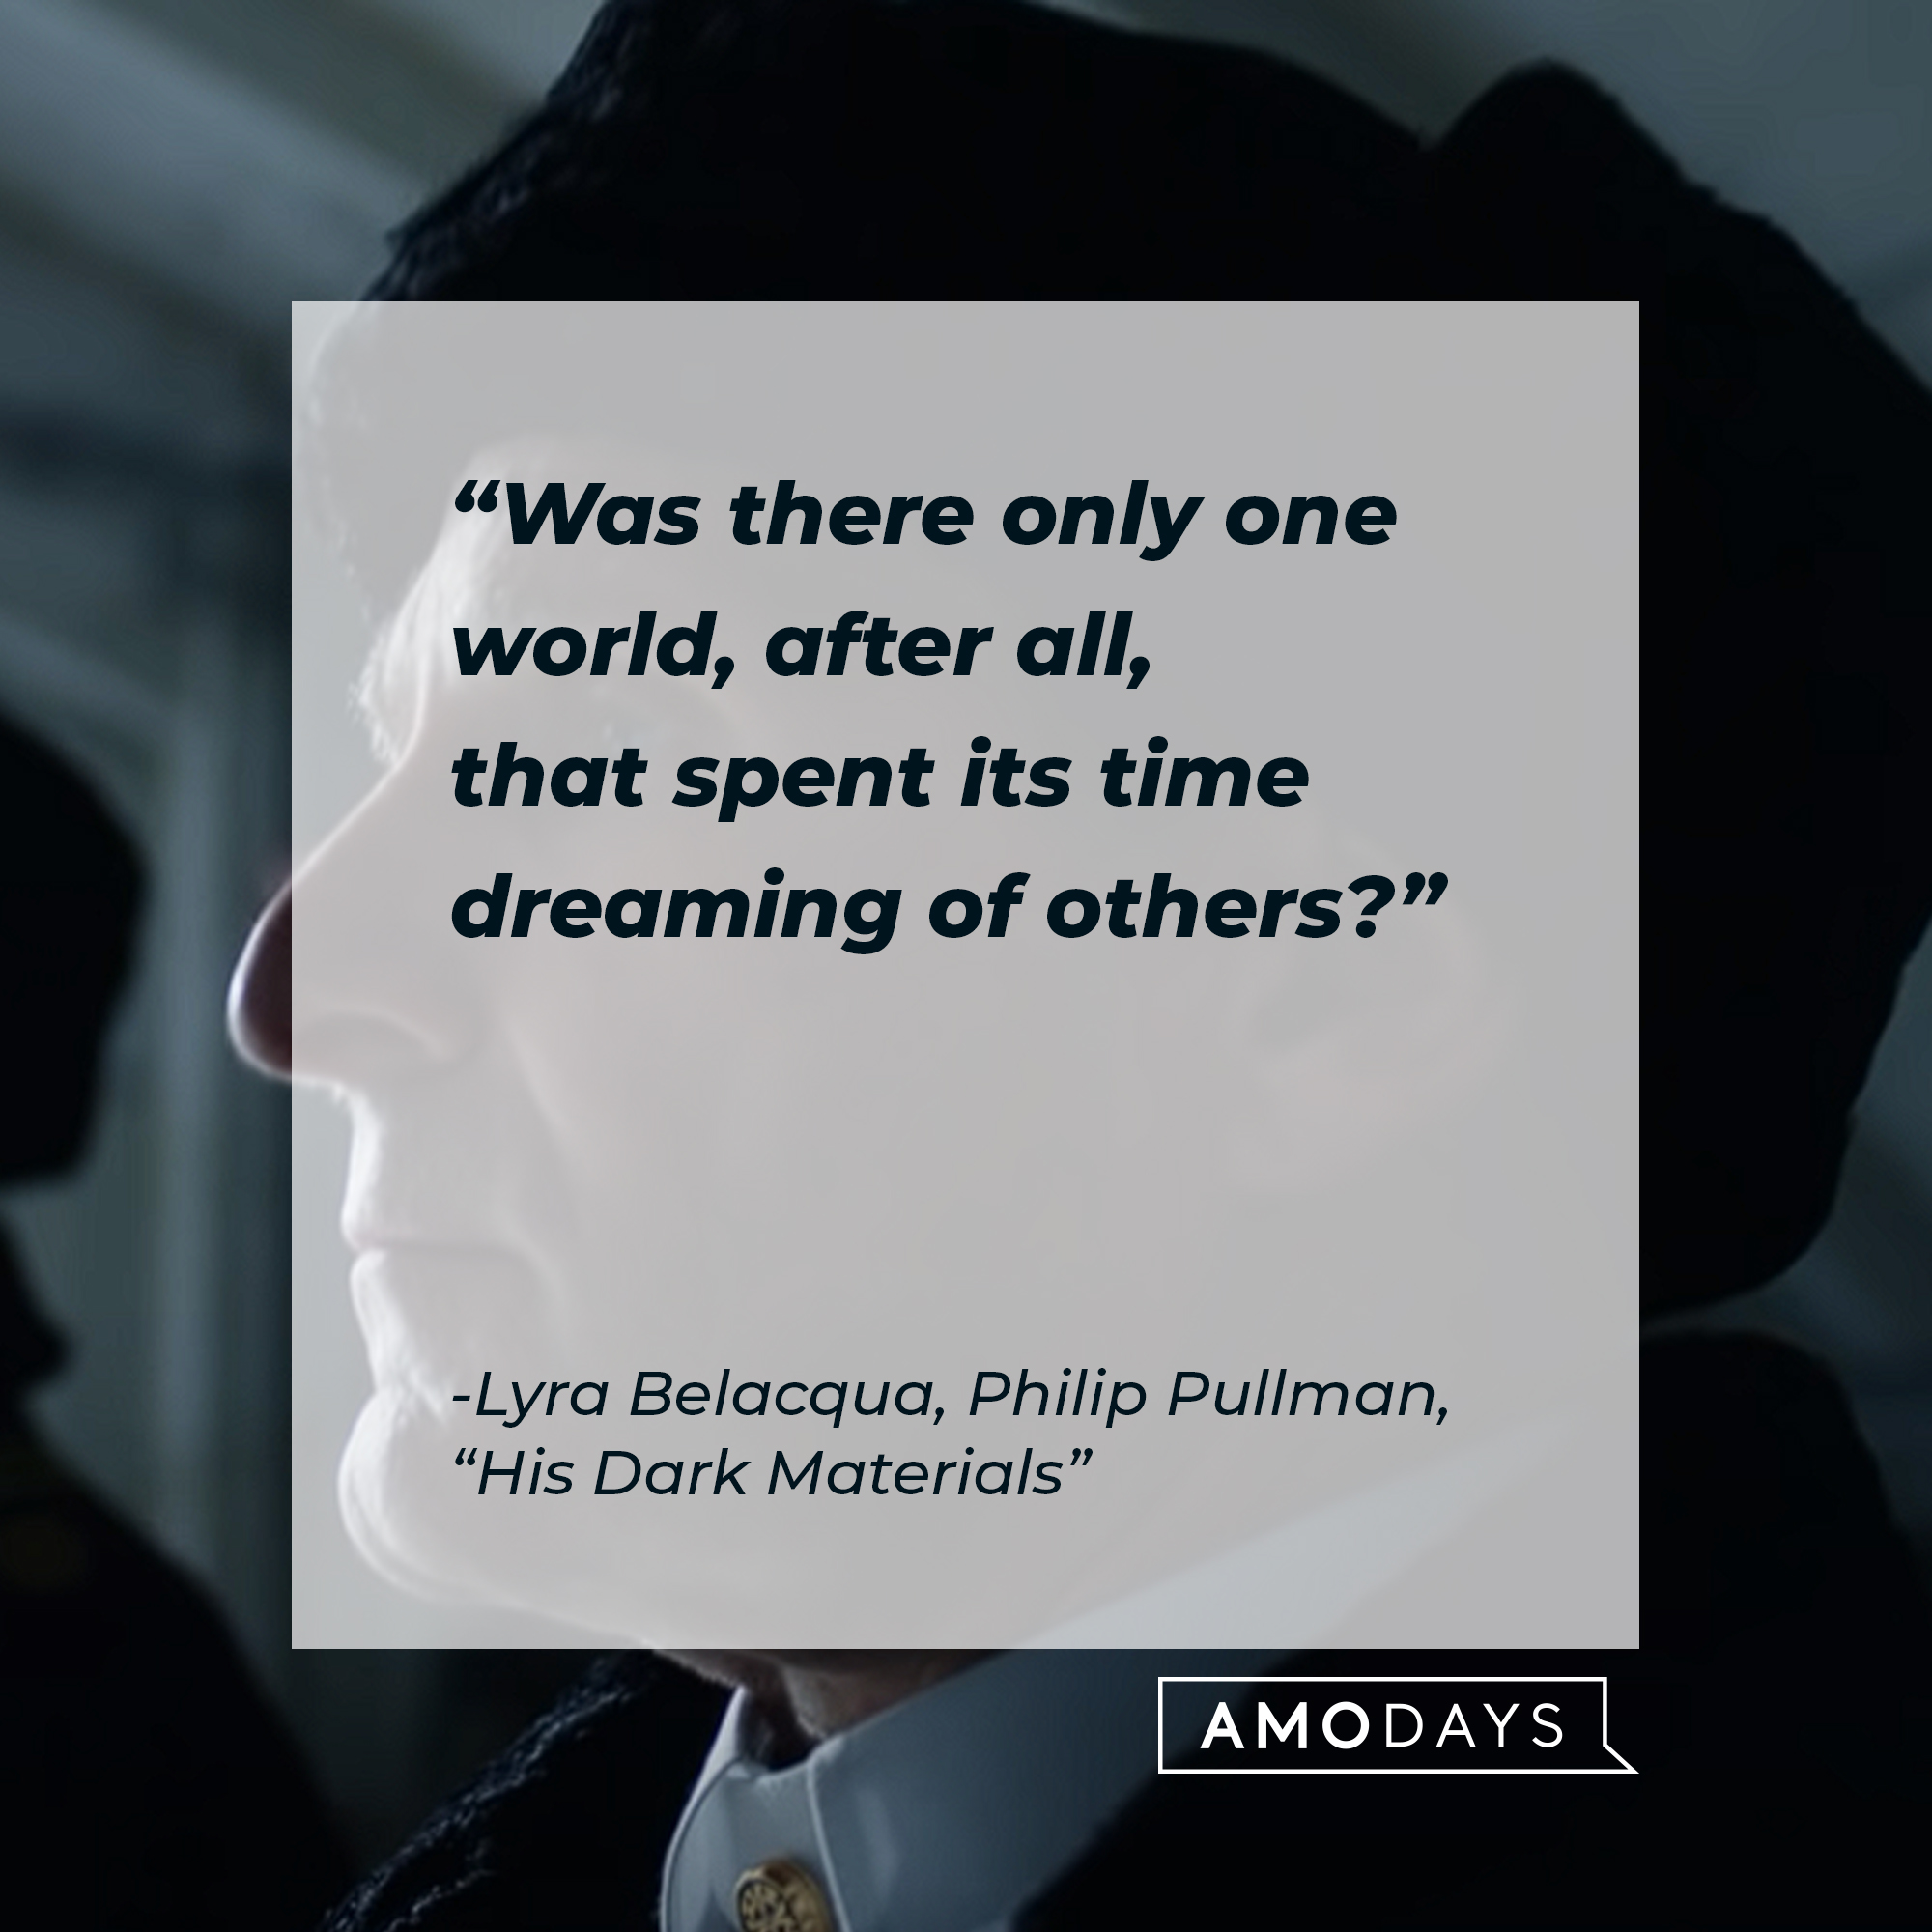 An image of a character from Philip Pullman’s "His Dark Materials" with Lyra Belacqua’s quote: “Was there only one world, after all, that spent its time dreaming of others?" | Source: youtube.com/HBO